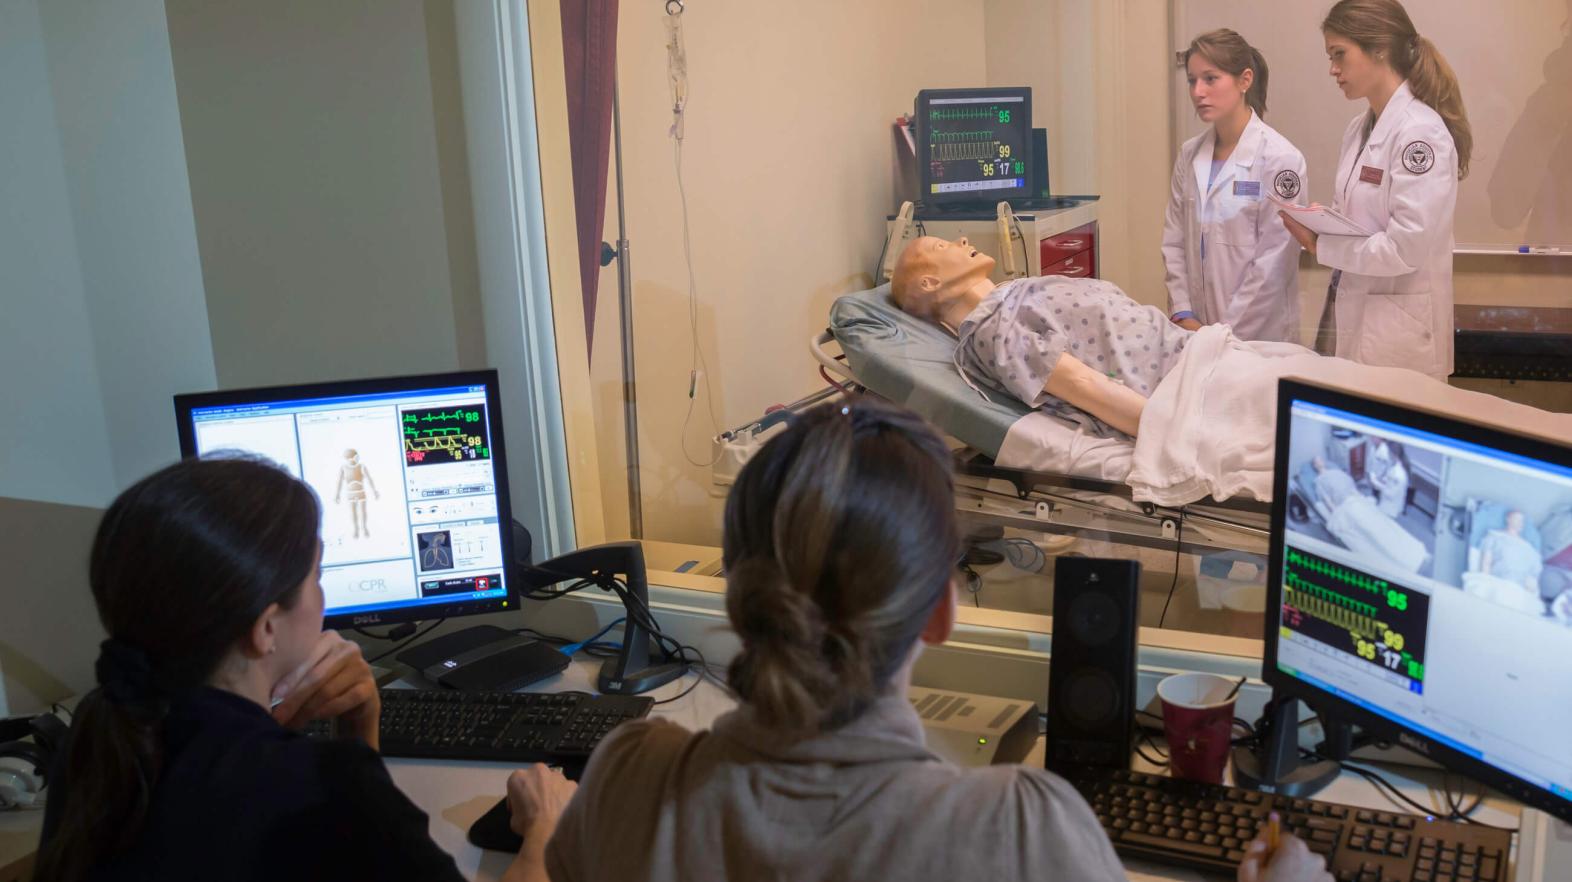 Two students observe two other students who are in the simulation lab. 